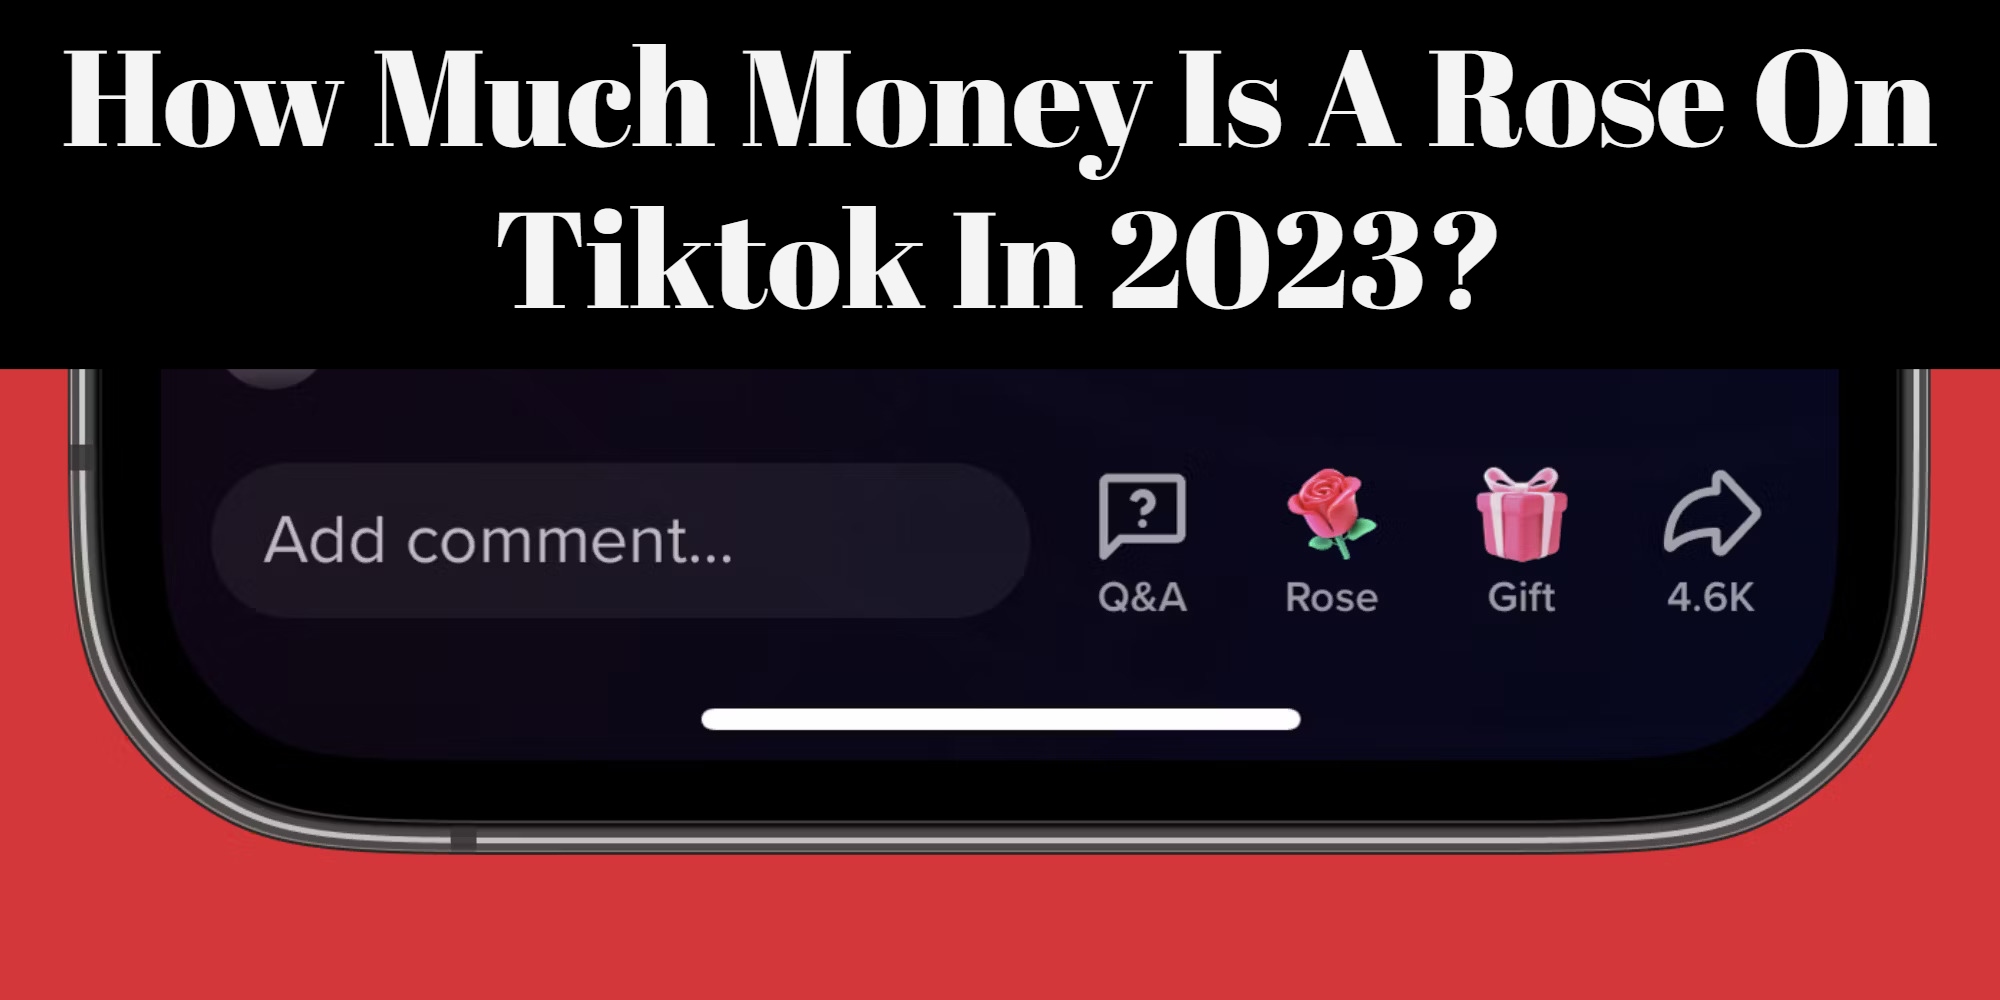 How Much Money Is A Rose On Tiktok In 2023? 